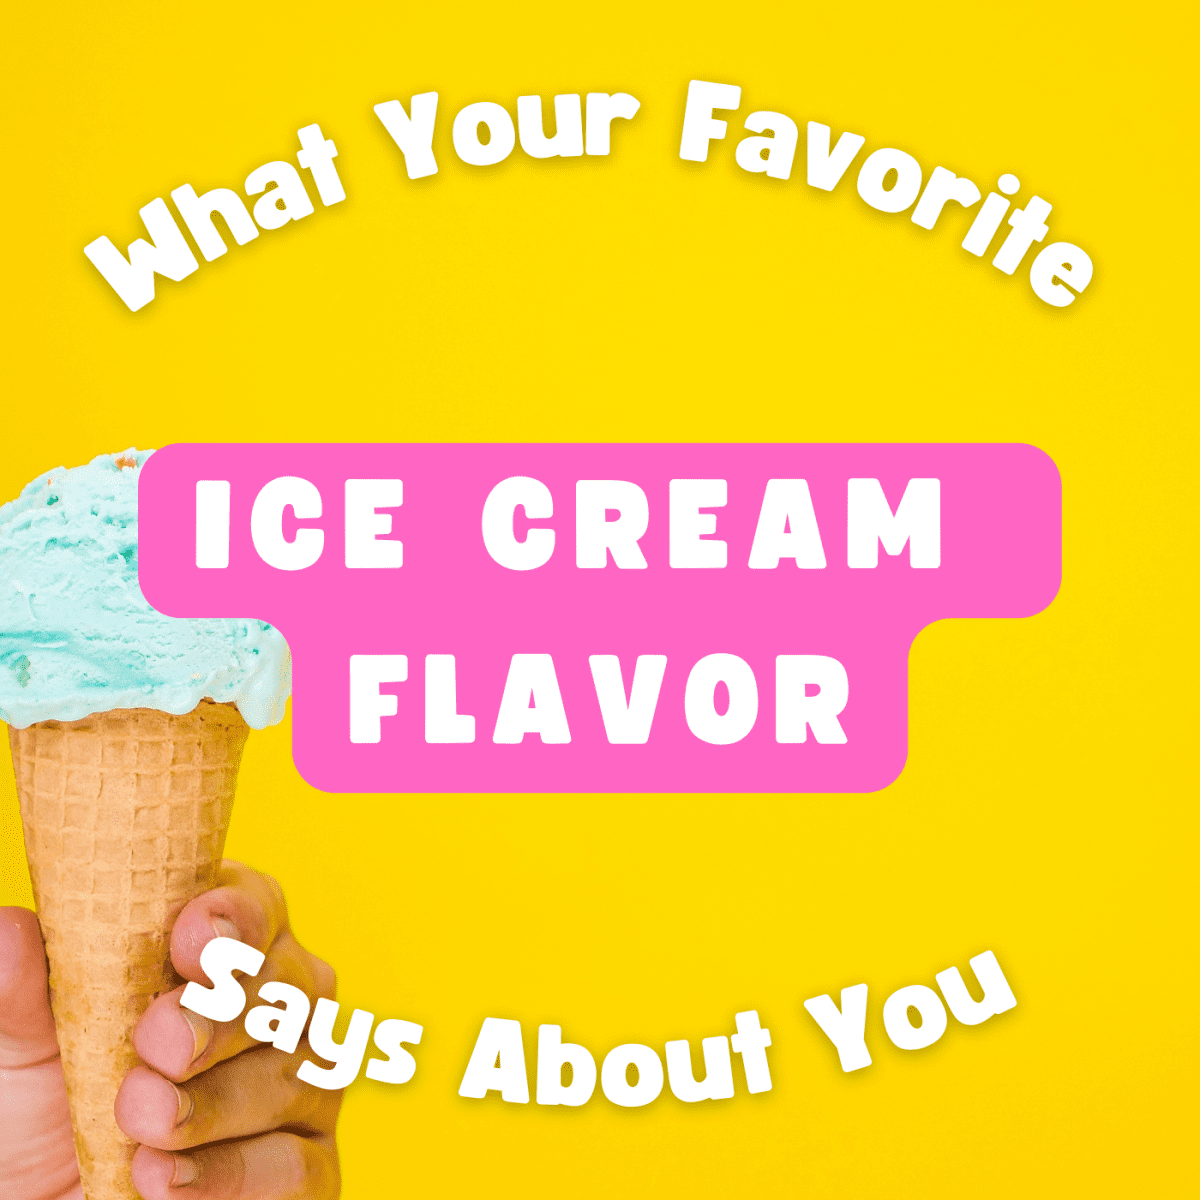 Which ice cream flavor is made from fresh mint leaves?